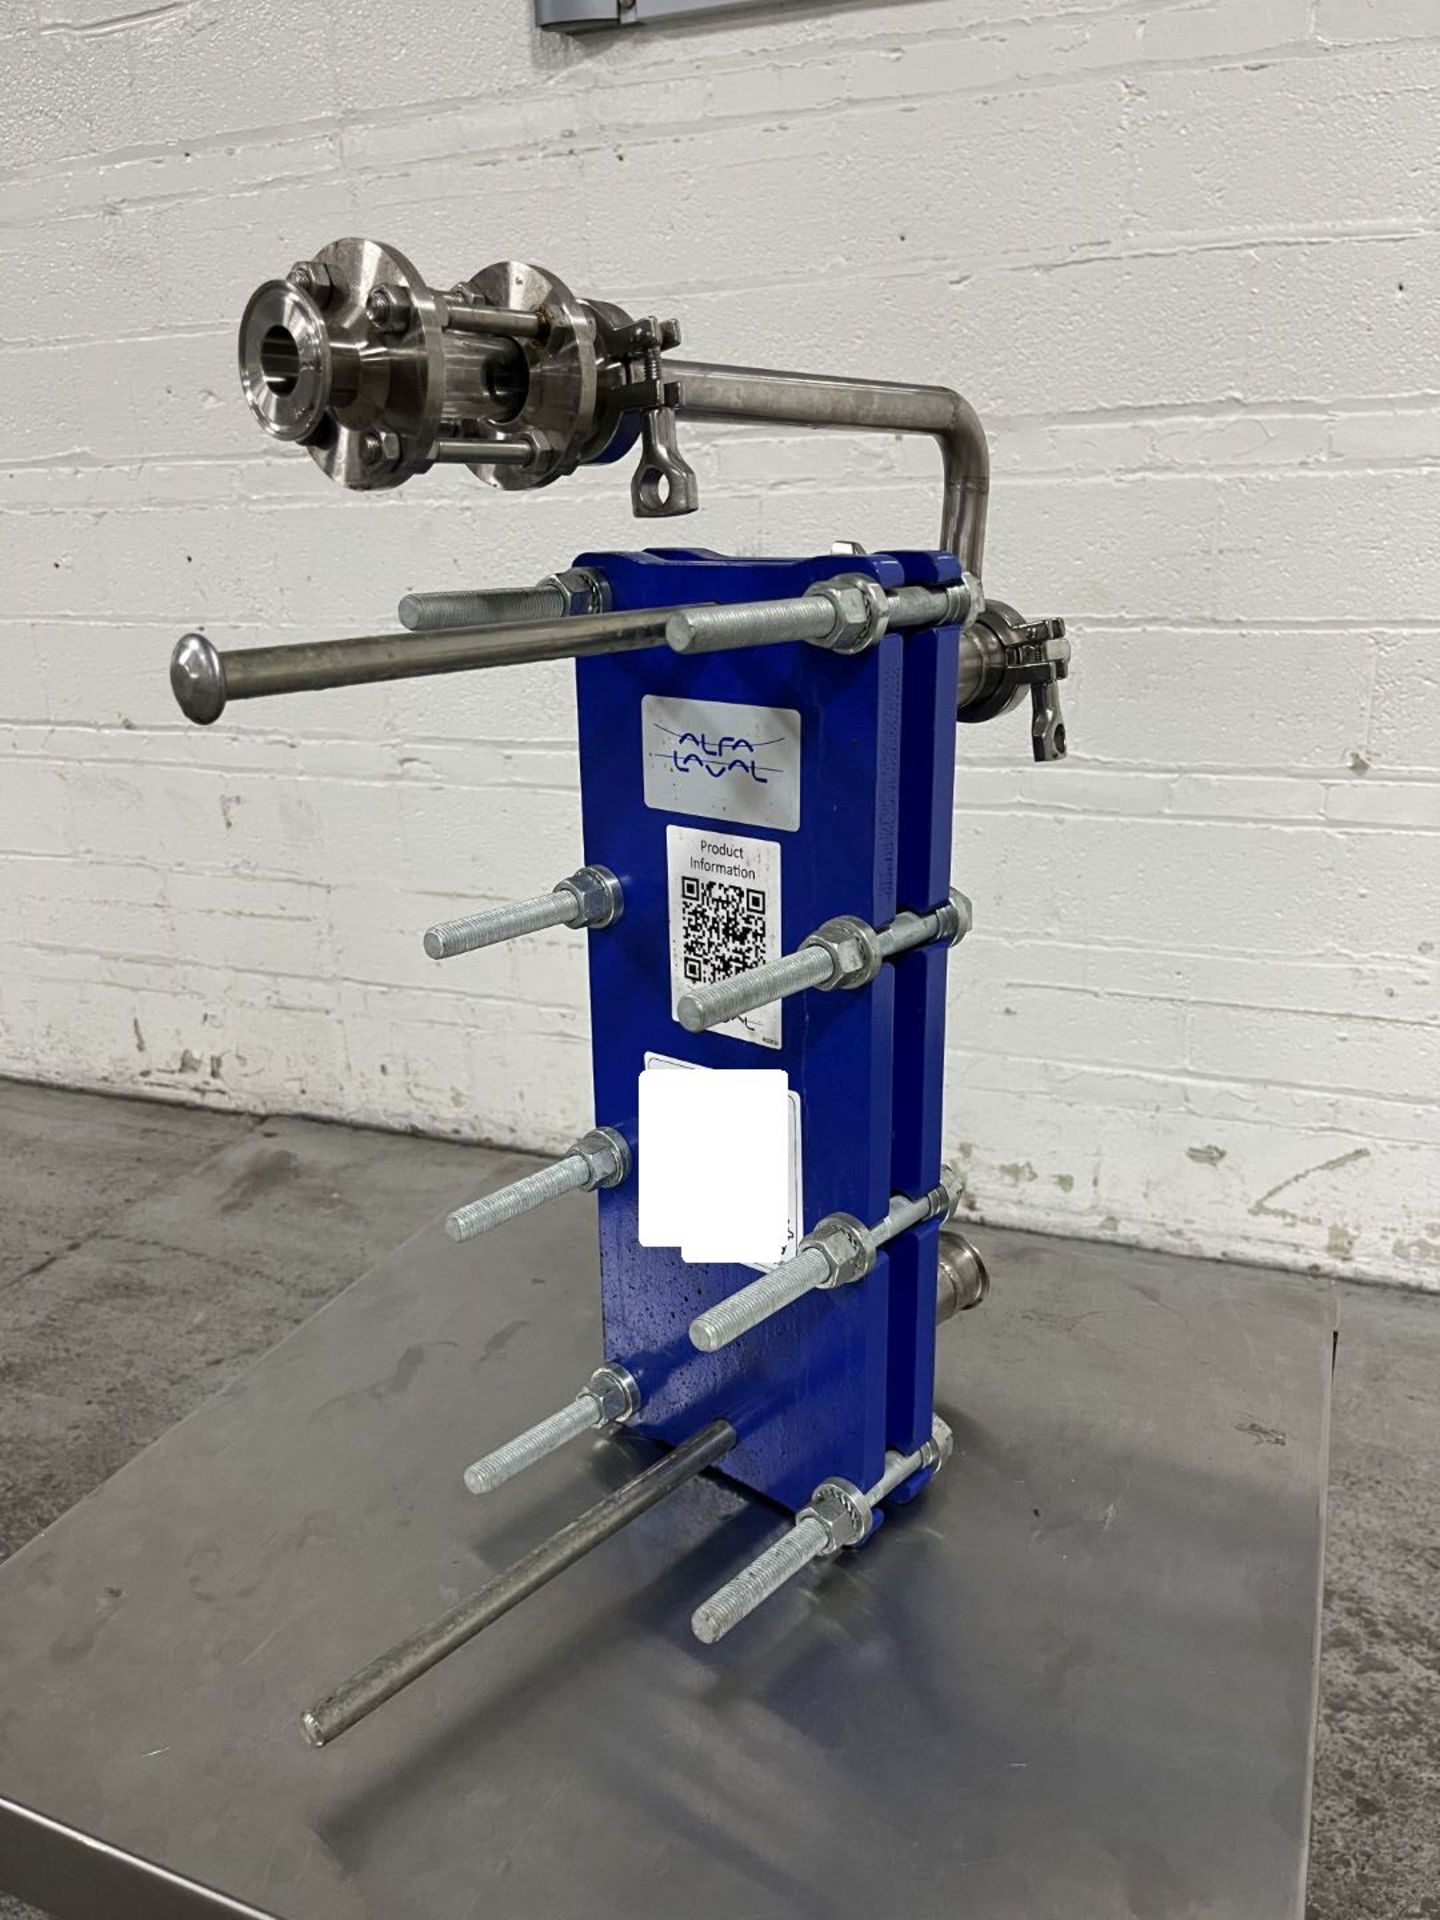 2.1 sq ft Alfa Laval plate heat exchanger, model M3-FG, stainless steel plates, rated 150 psi at 250